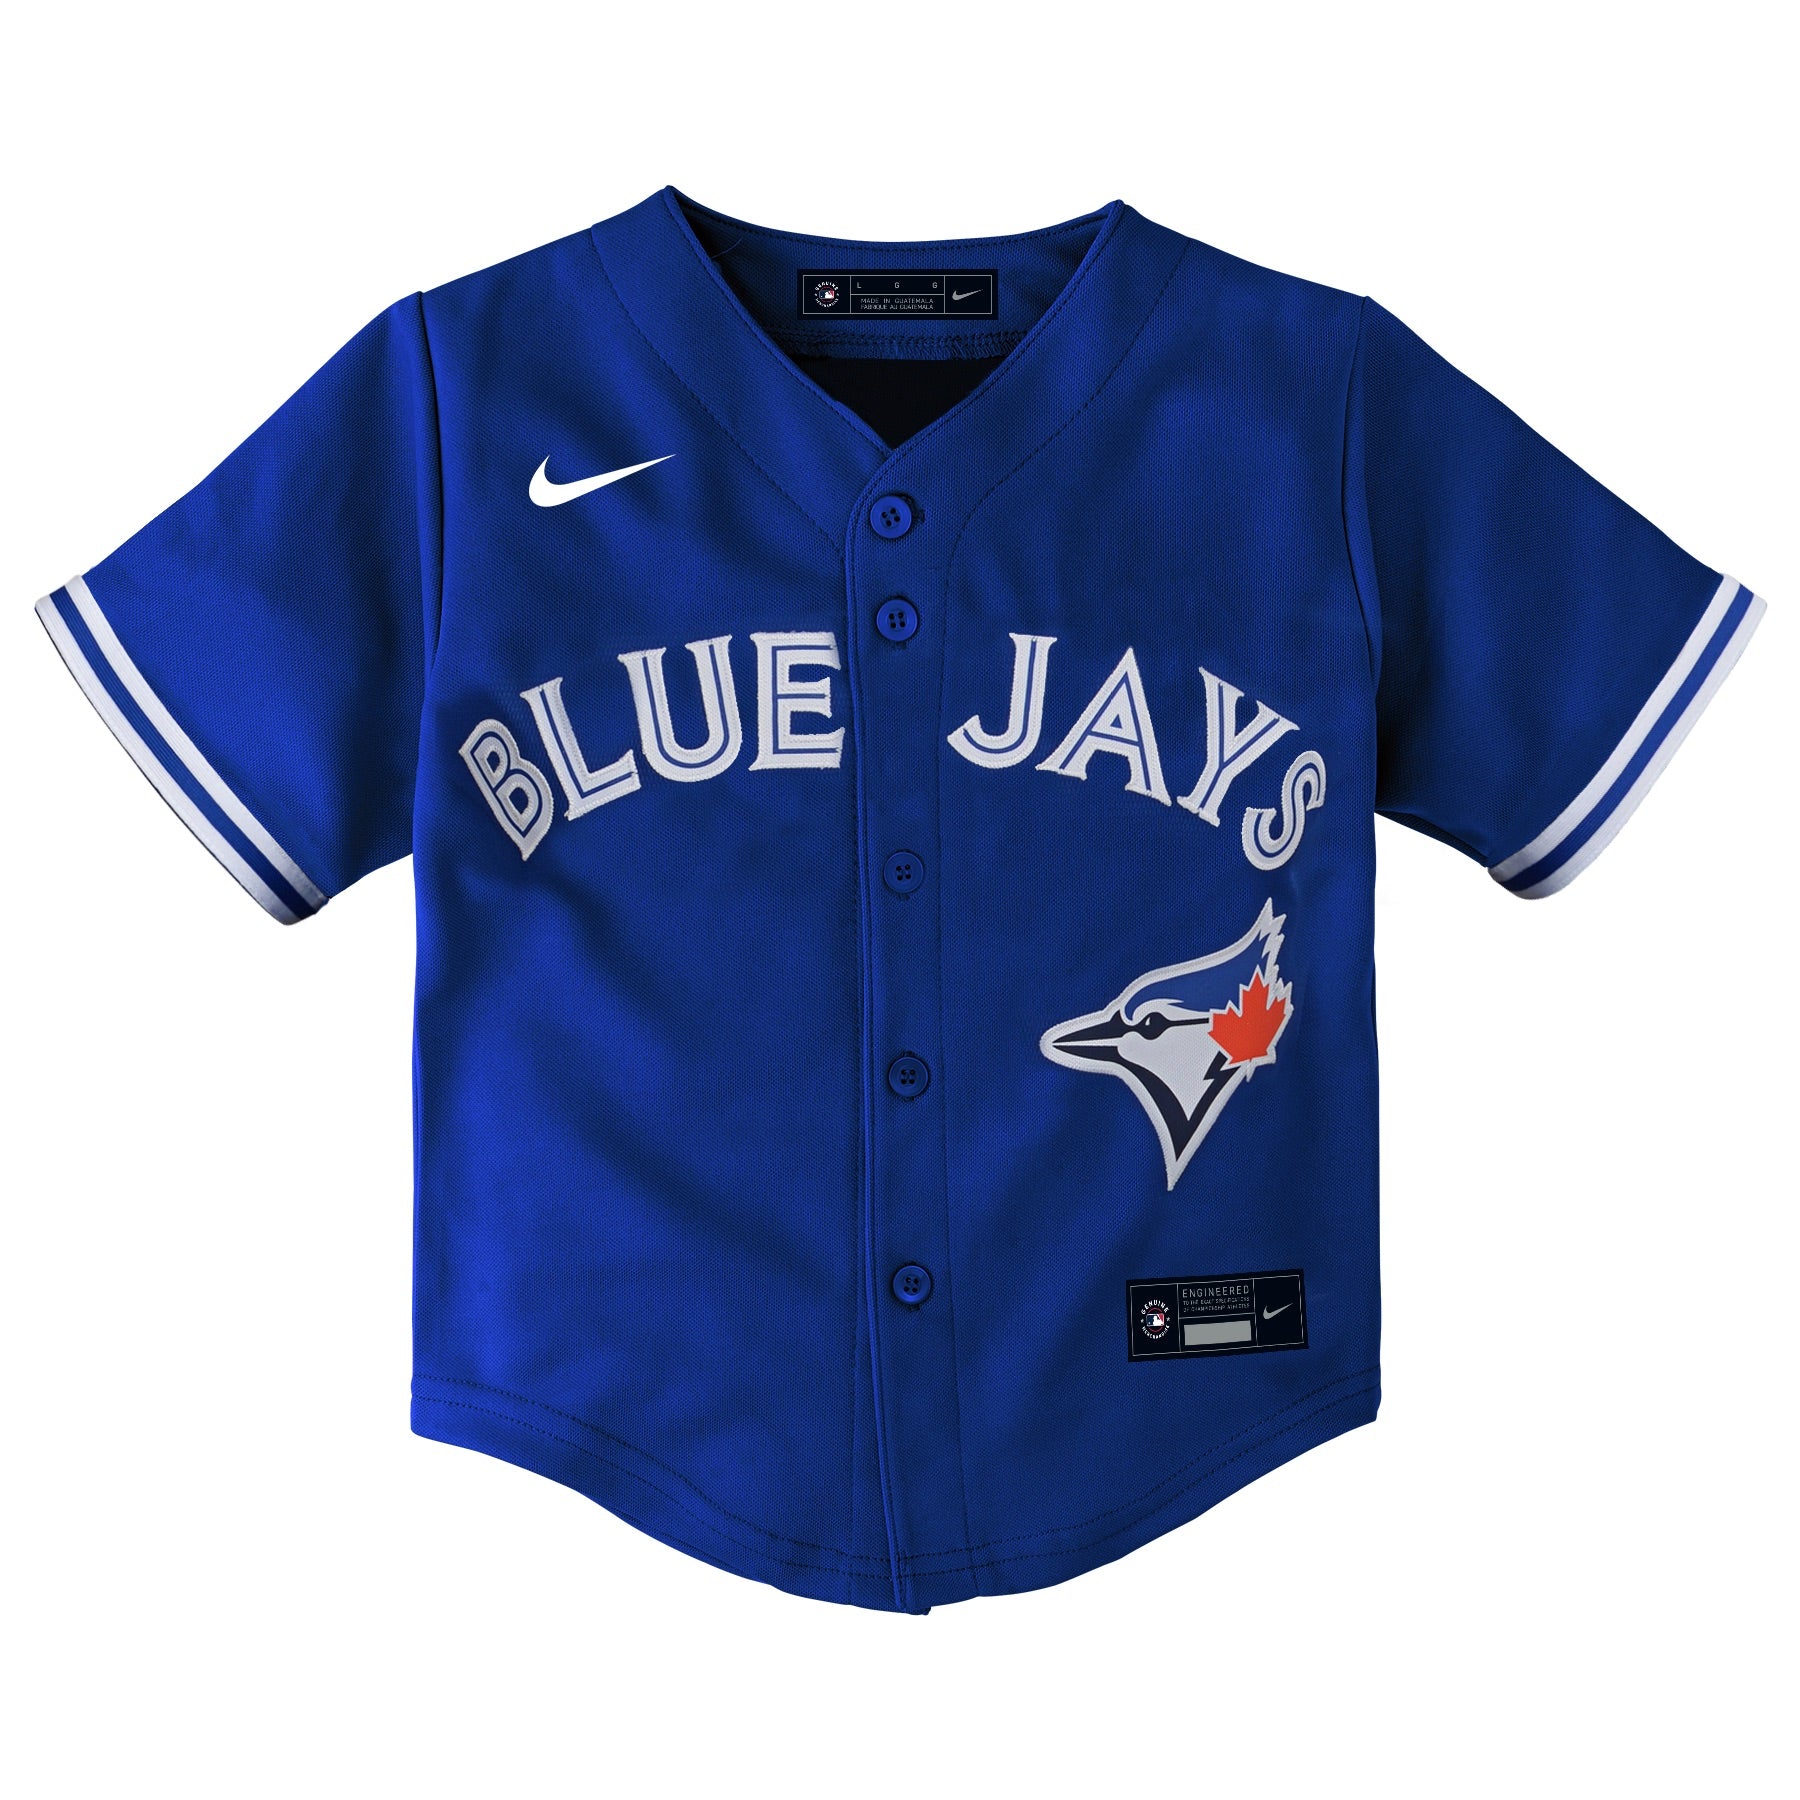 Toronto Blue Jays Nike Official Replica Home Jersey - Mens with Bichette 11  printing